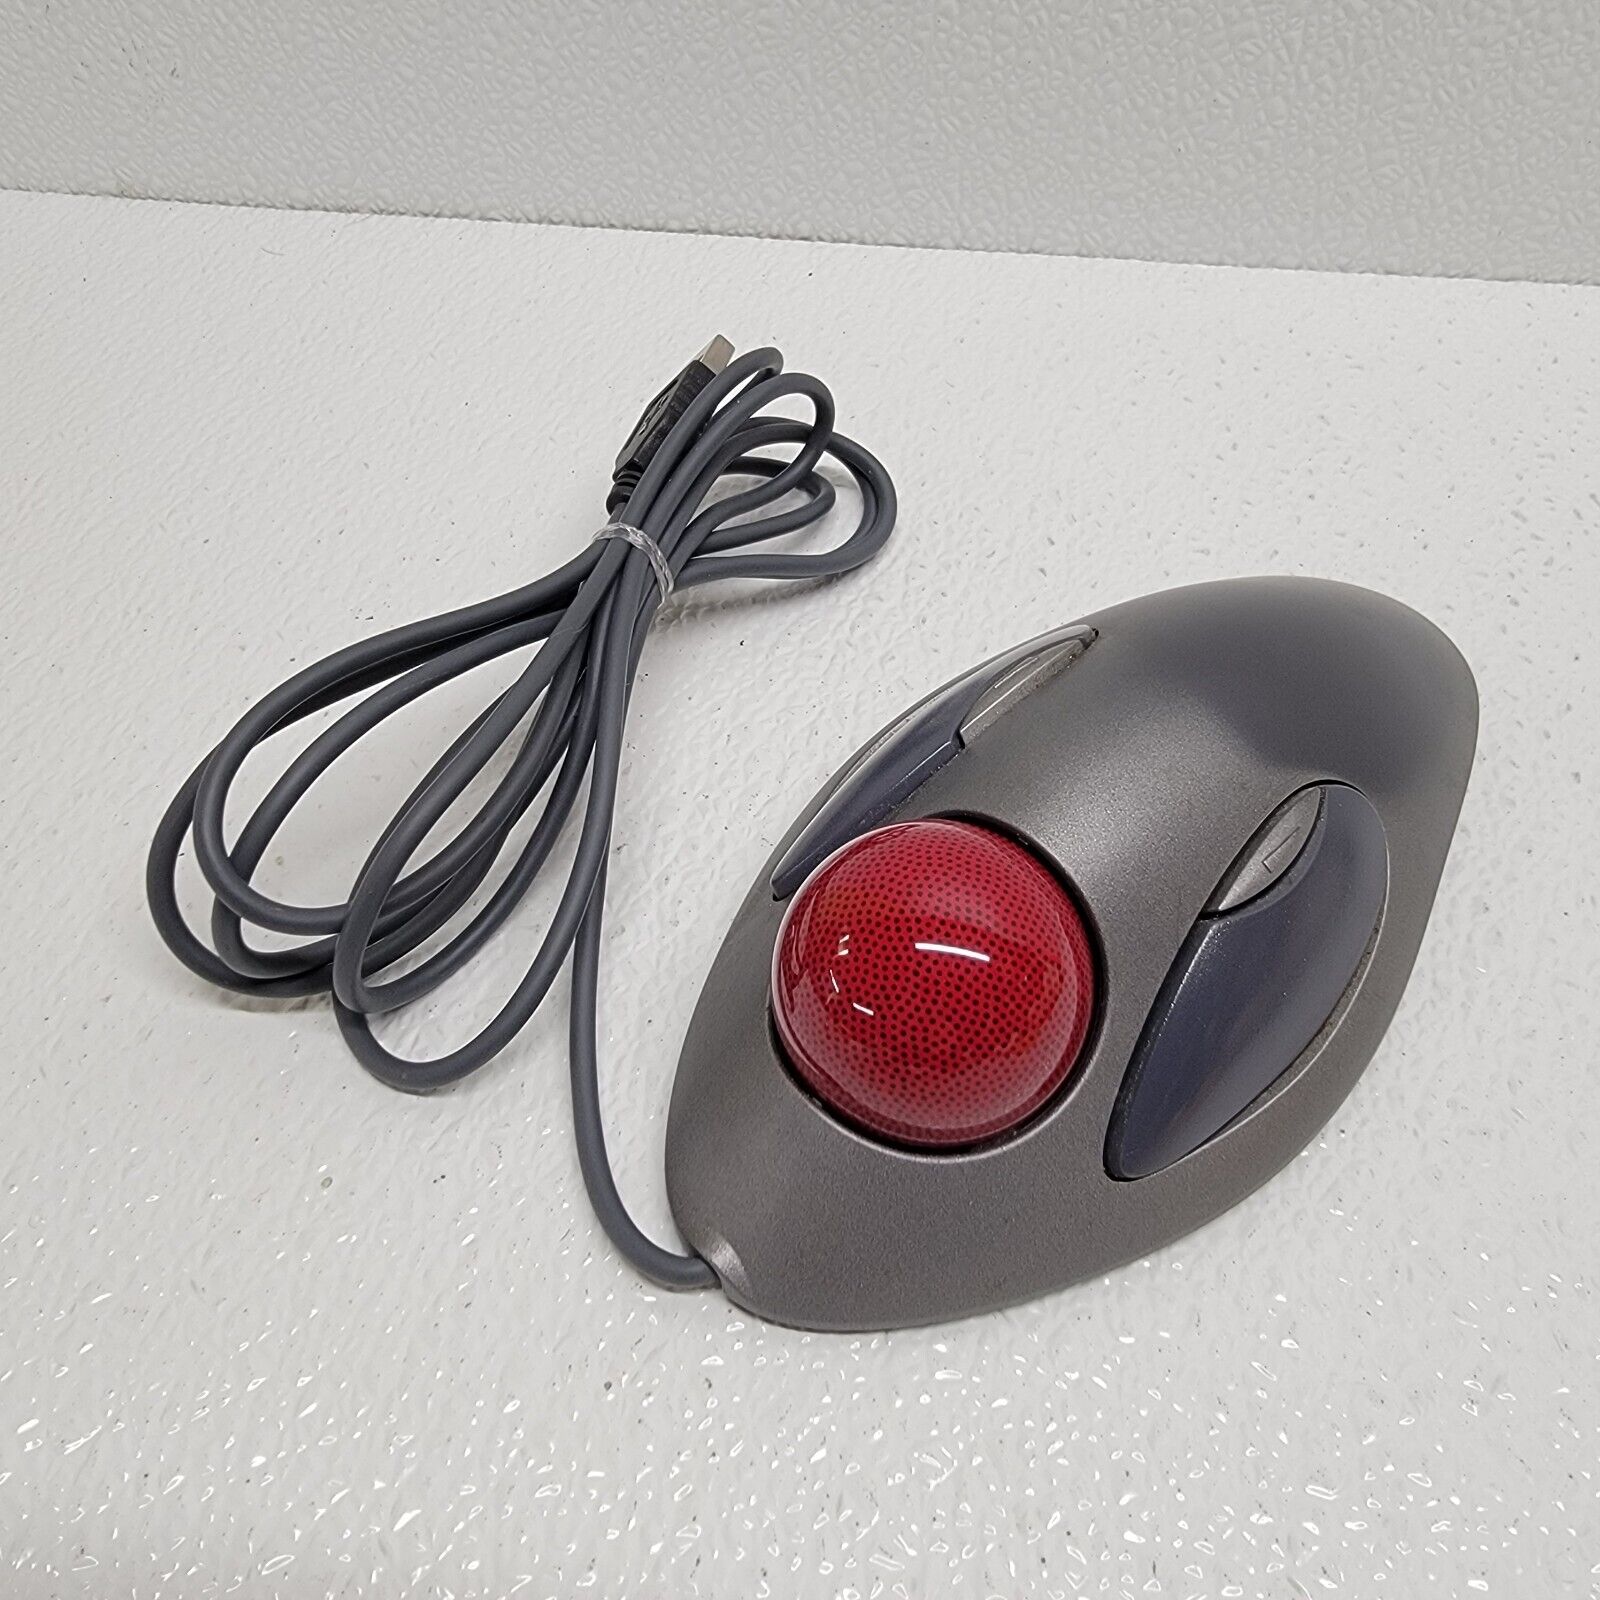 Logitech T-BC21 USB Wired Optical Trackman Red Marble Mouse Trackball - TESTED